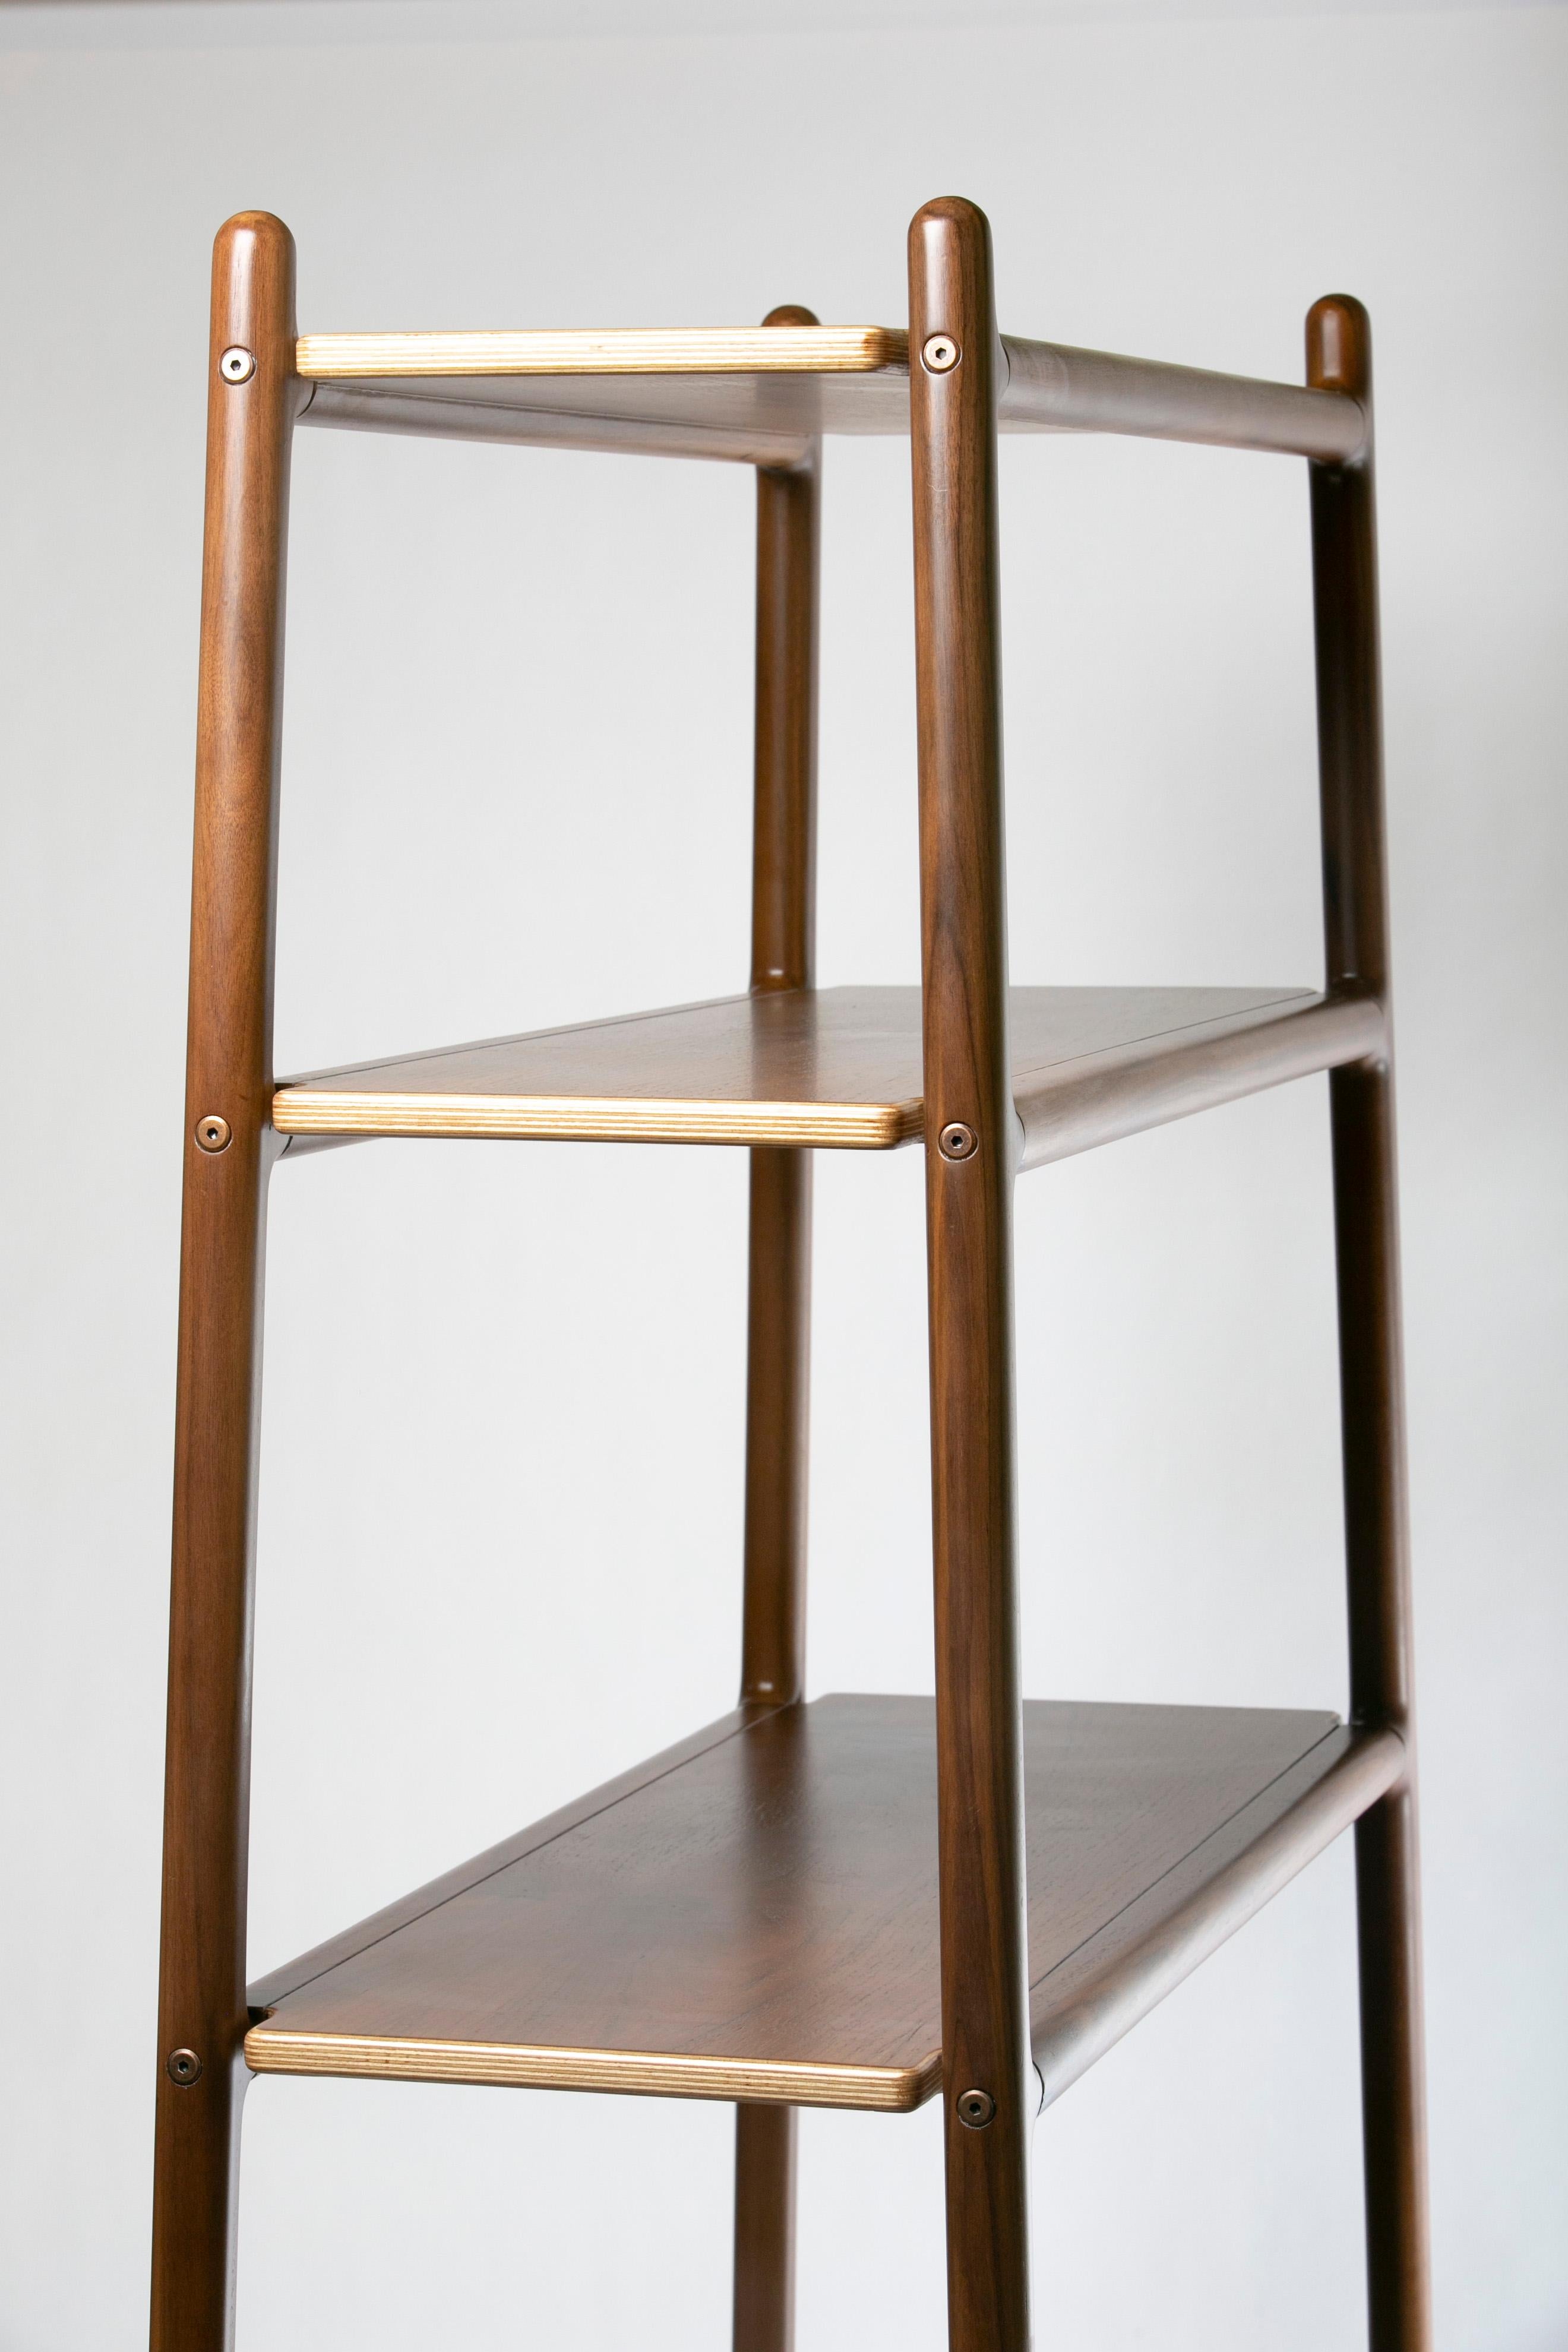  Mictlán 80, Walnut Bookcase, Contemporary Mexican Design by Juskani Alonso For Sale 3